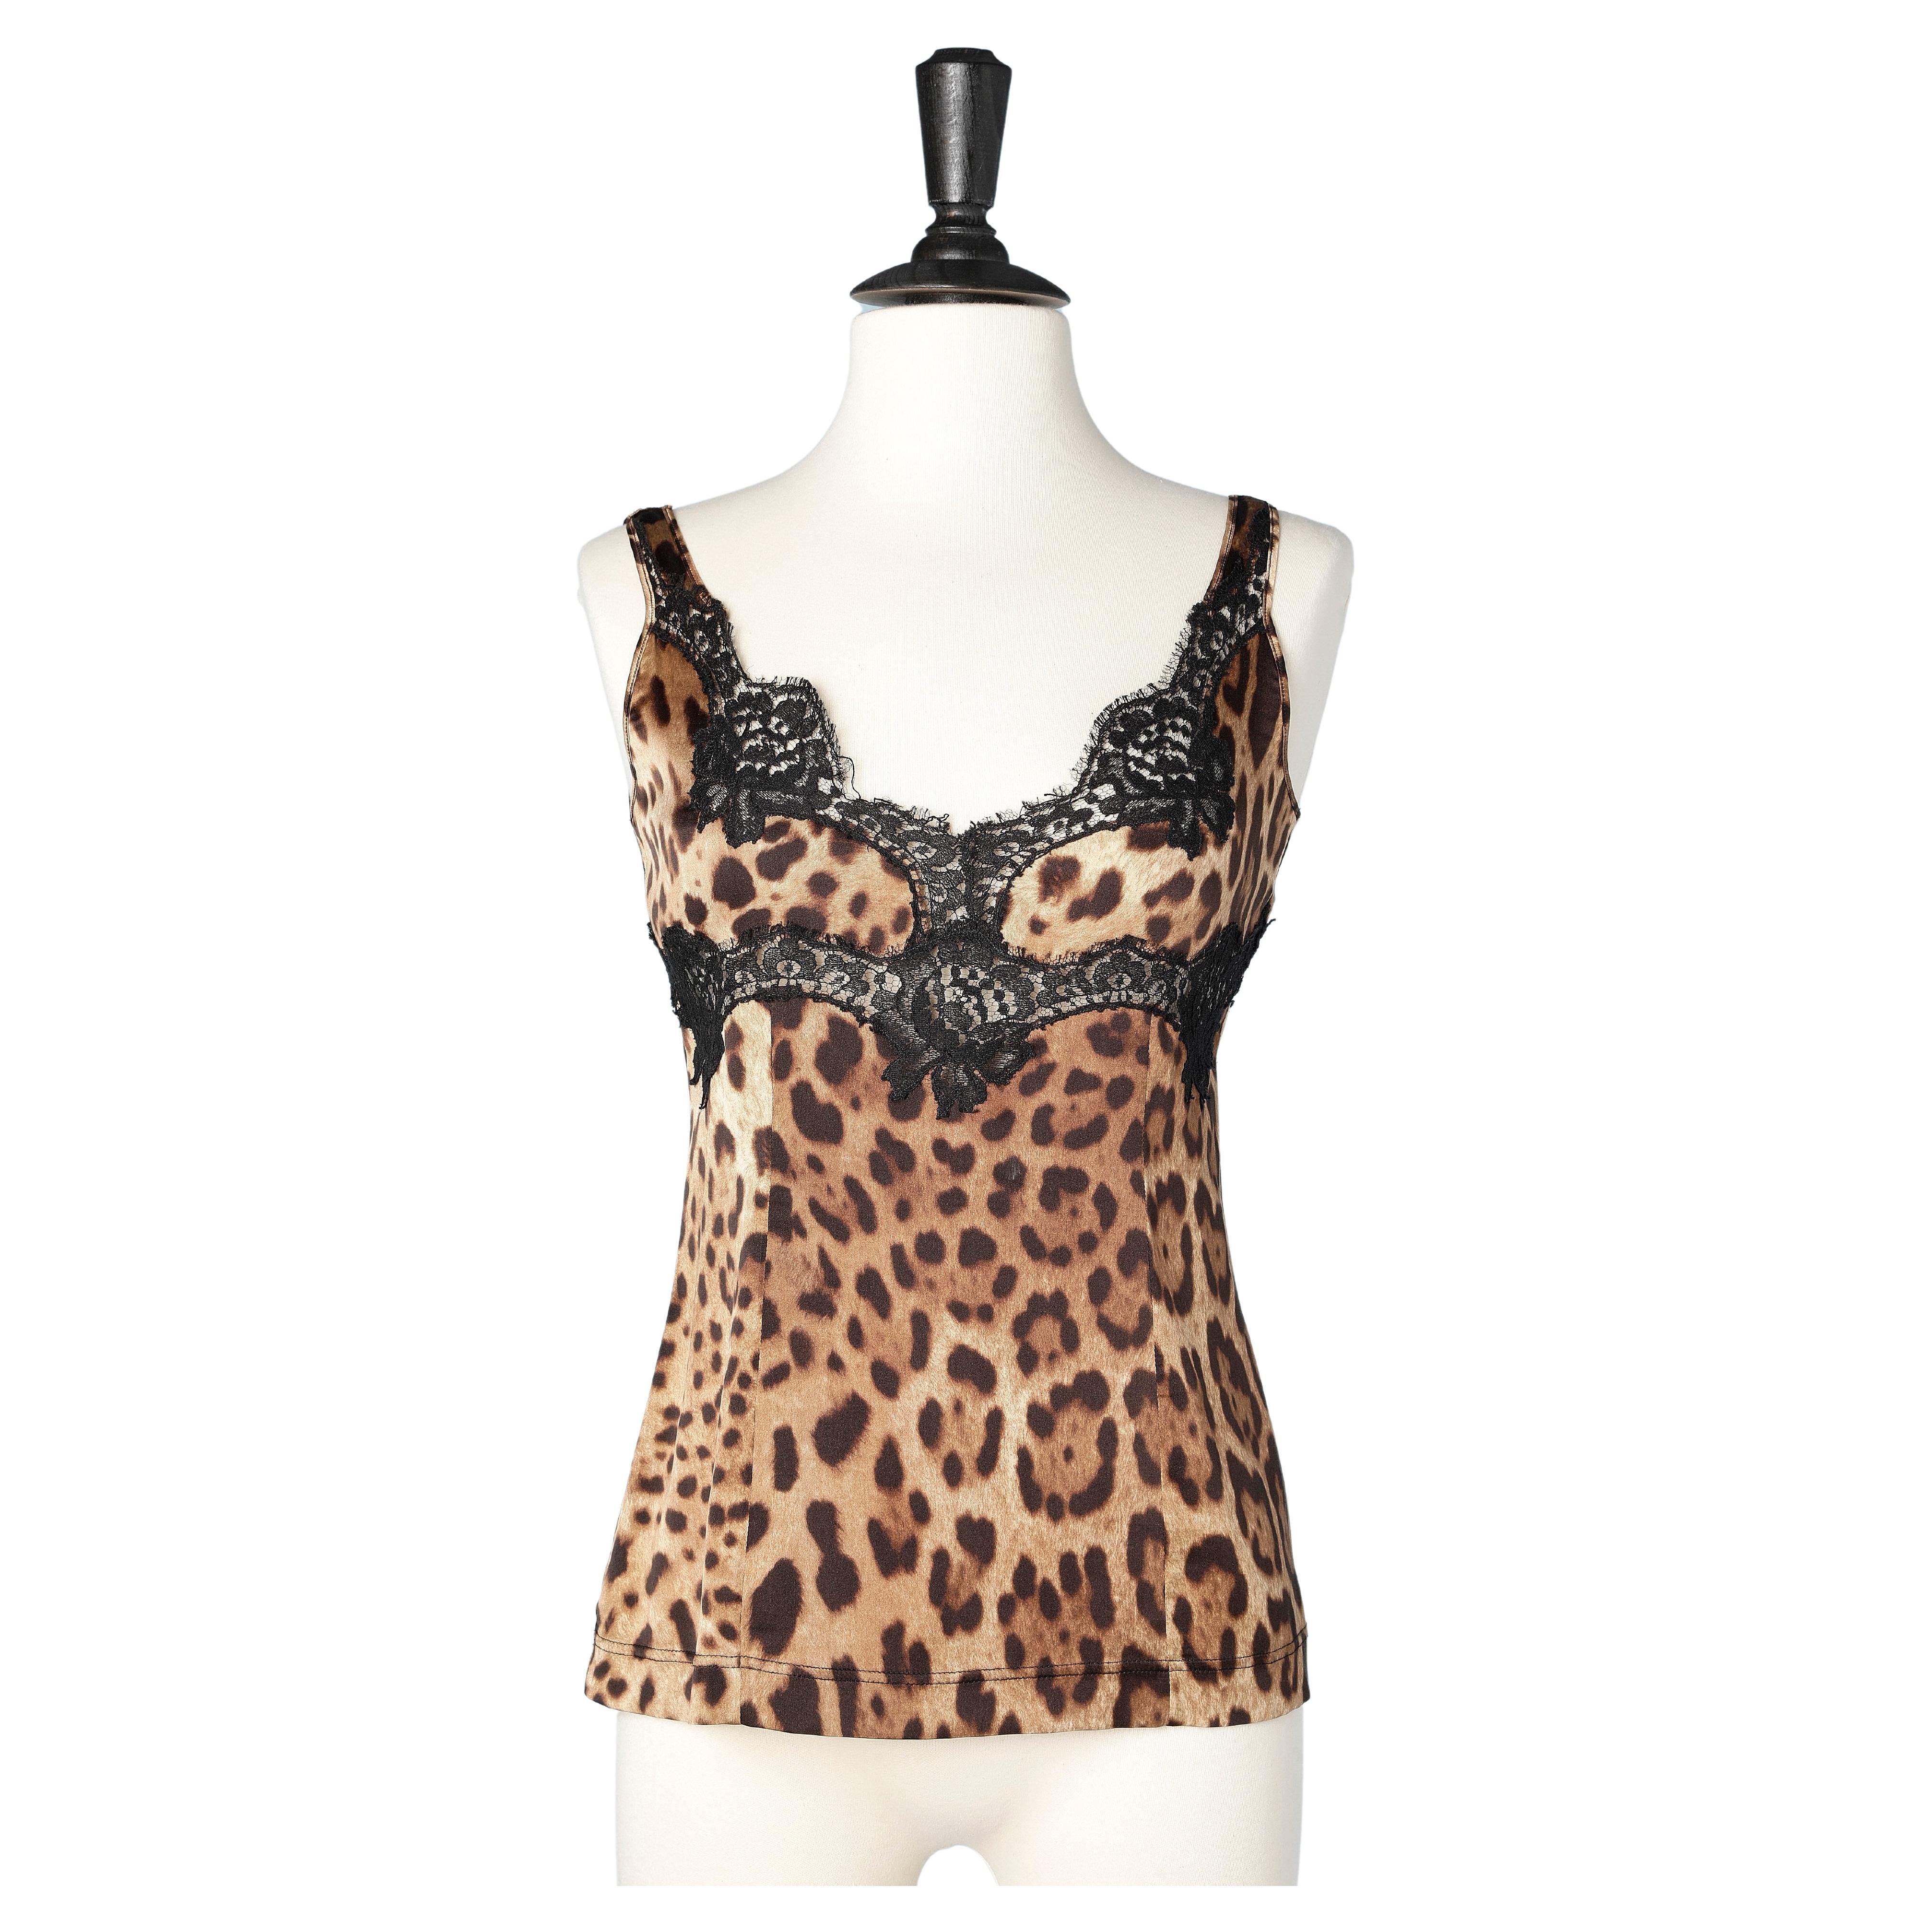 Silk leopard tank top with lace Dolce & Gabbana 